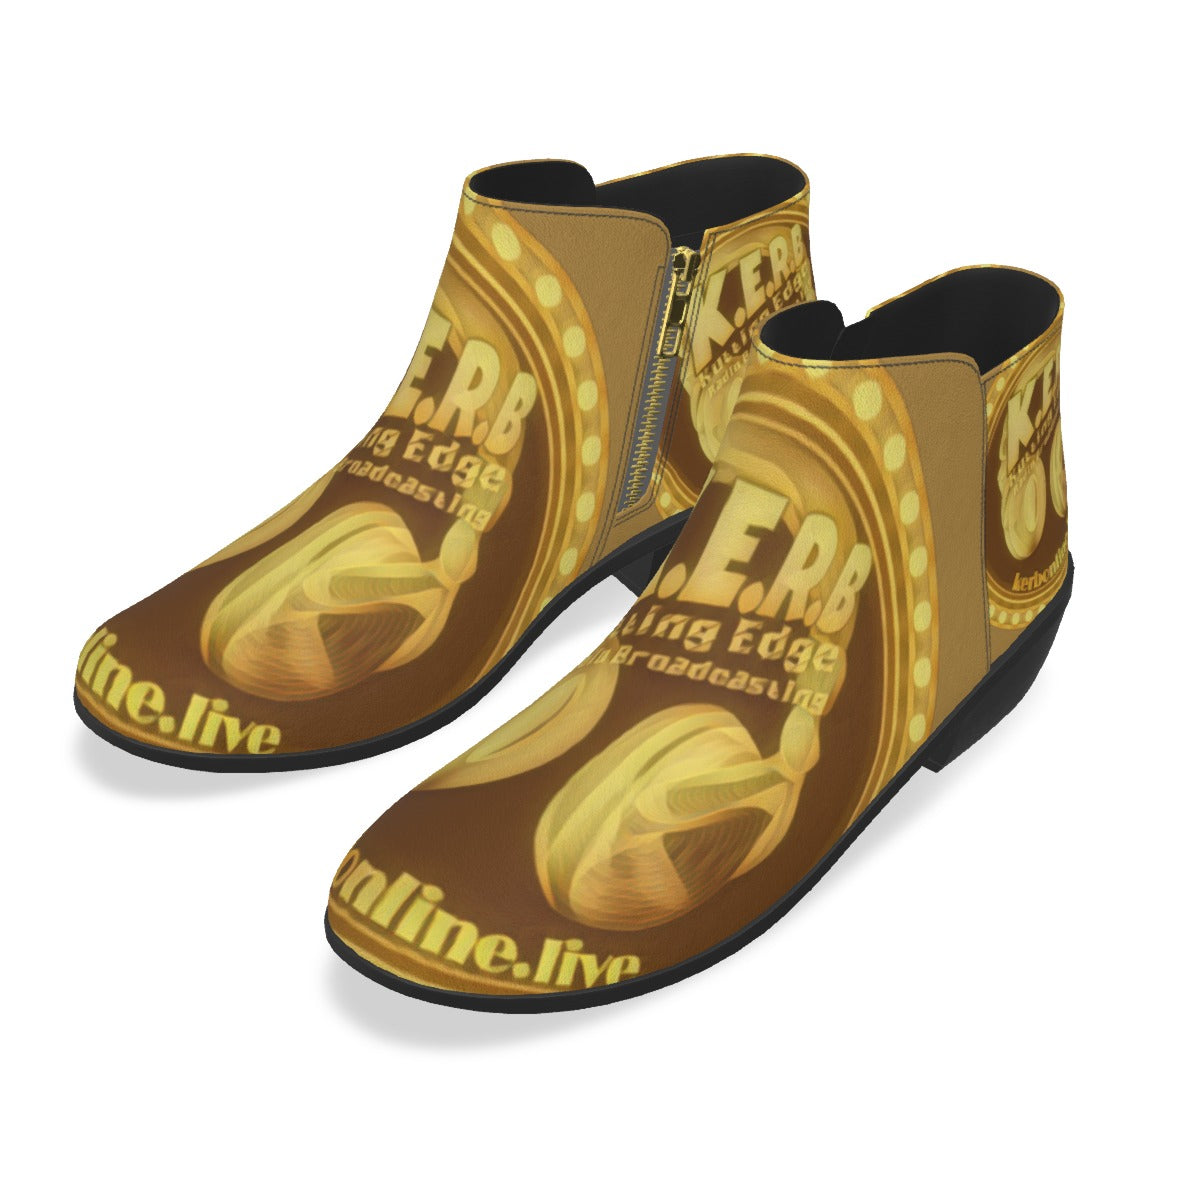 KERB Gold Rush Logo Women's Western Ankle Boots